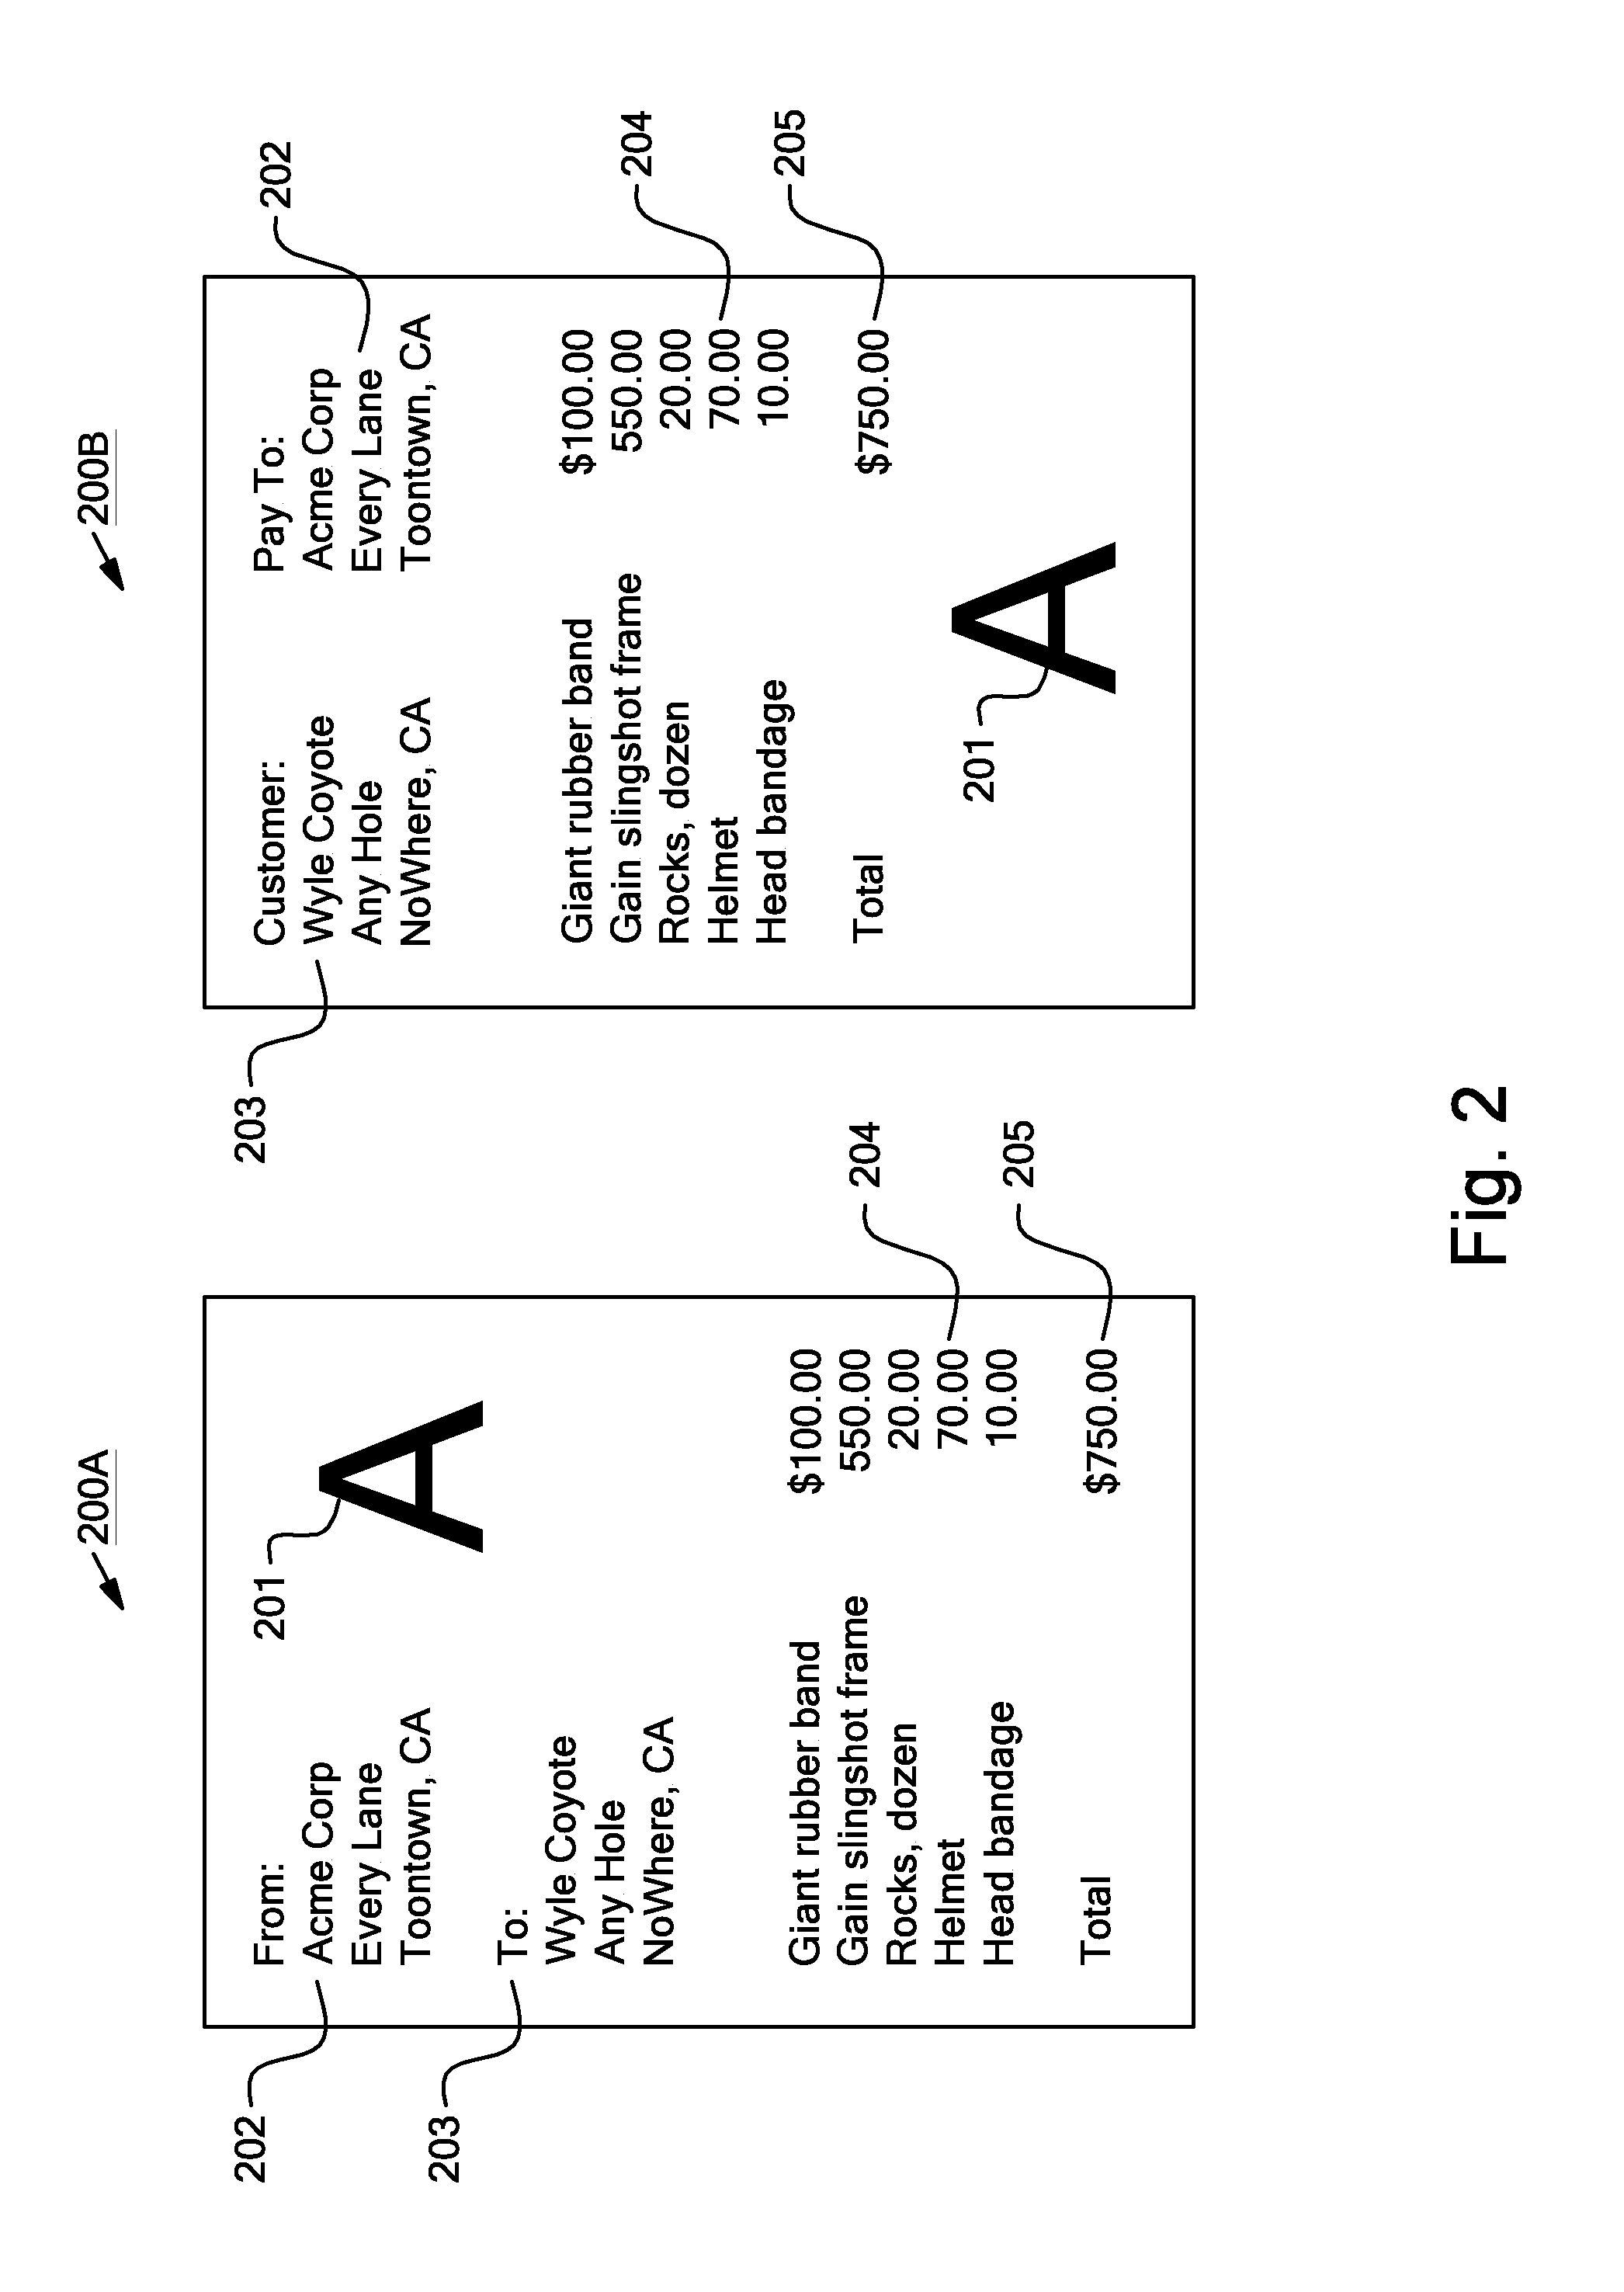 Method and system for using social networks to verify entity affiliations and identities